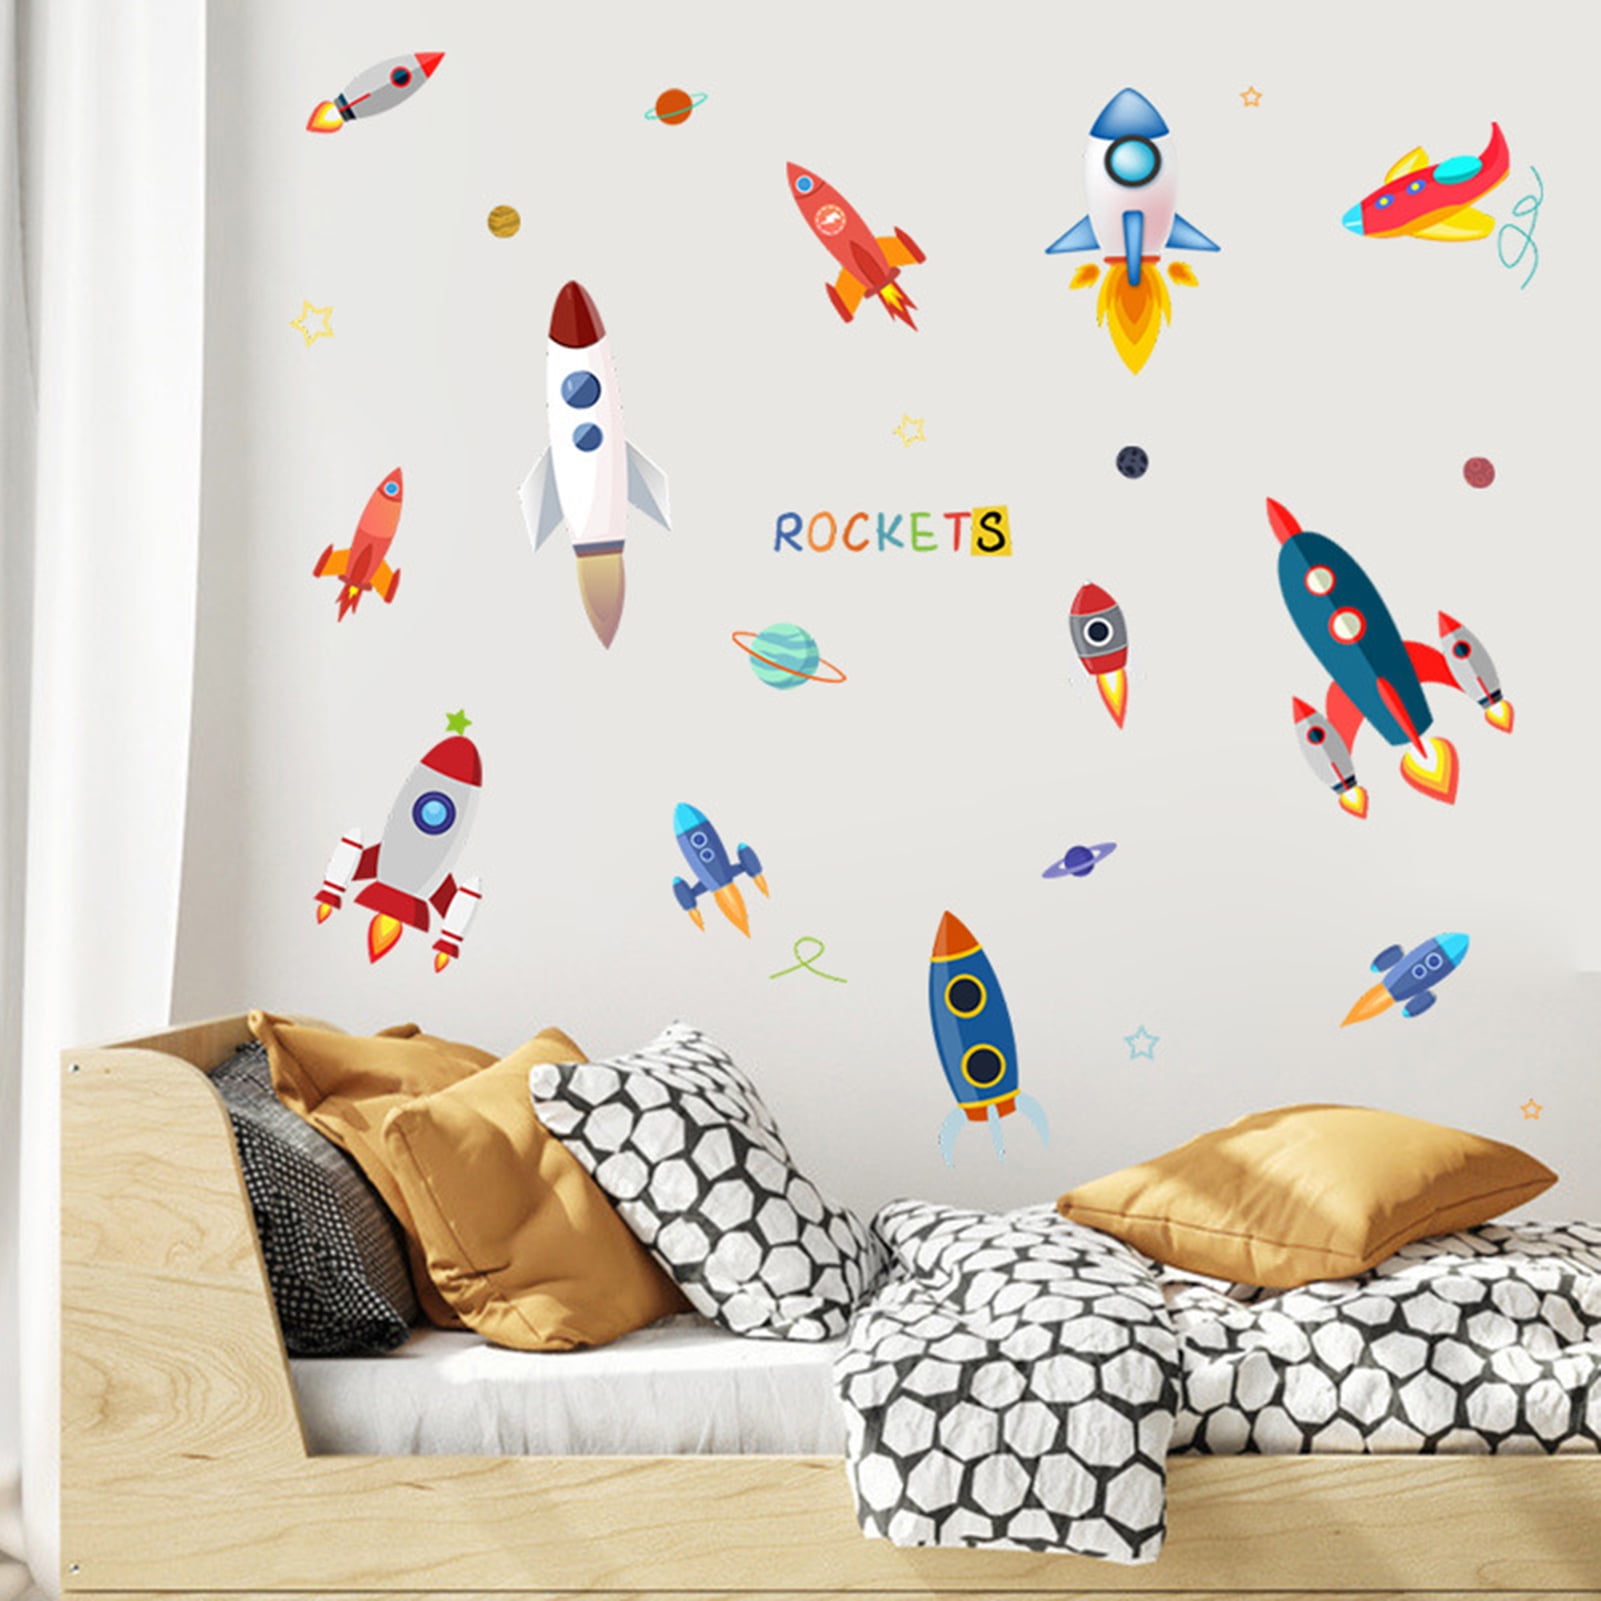 decalmile Space Planets Rockets Kids Wall Decals Solar System Stars Wall Stickers Baby Nursery Boys Bedroom Playroom Wall Decor